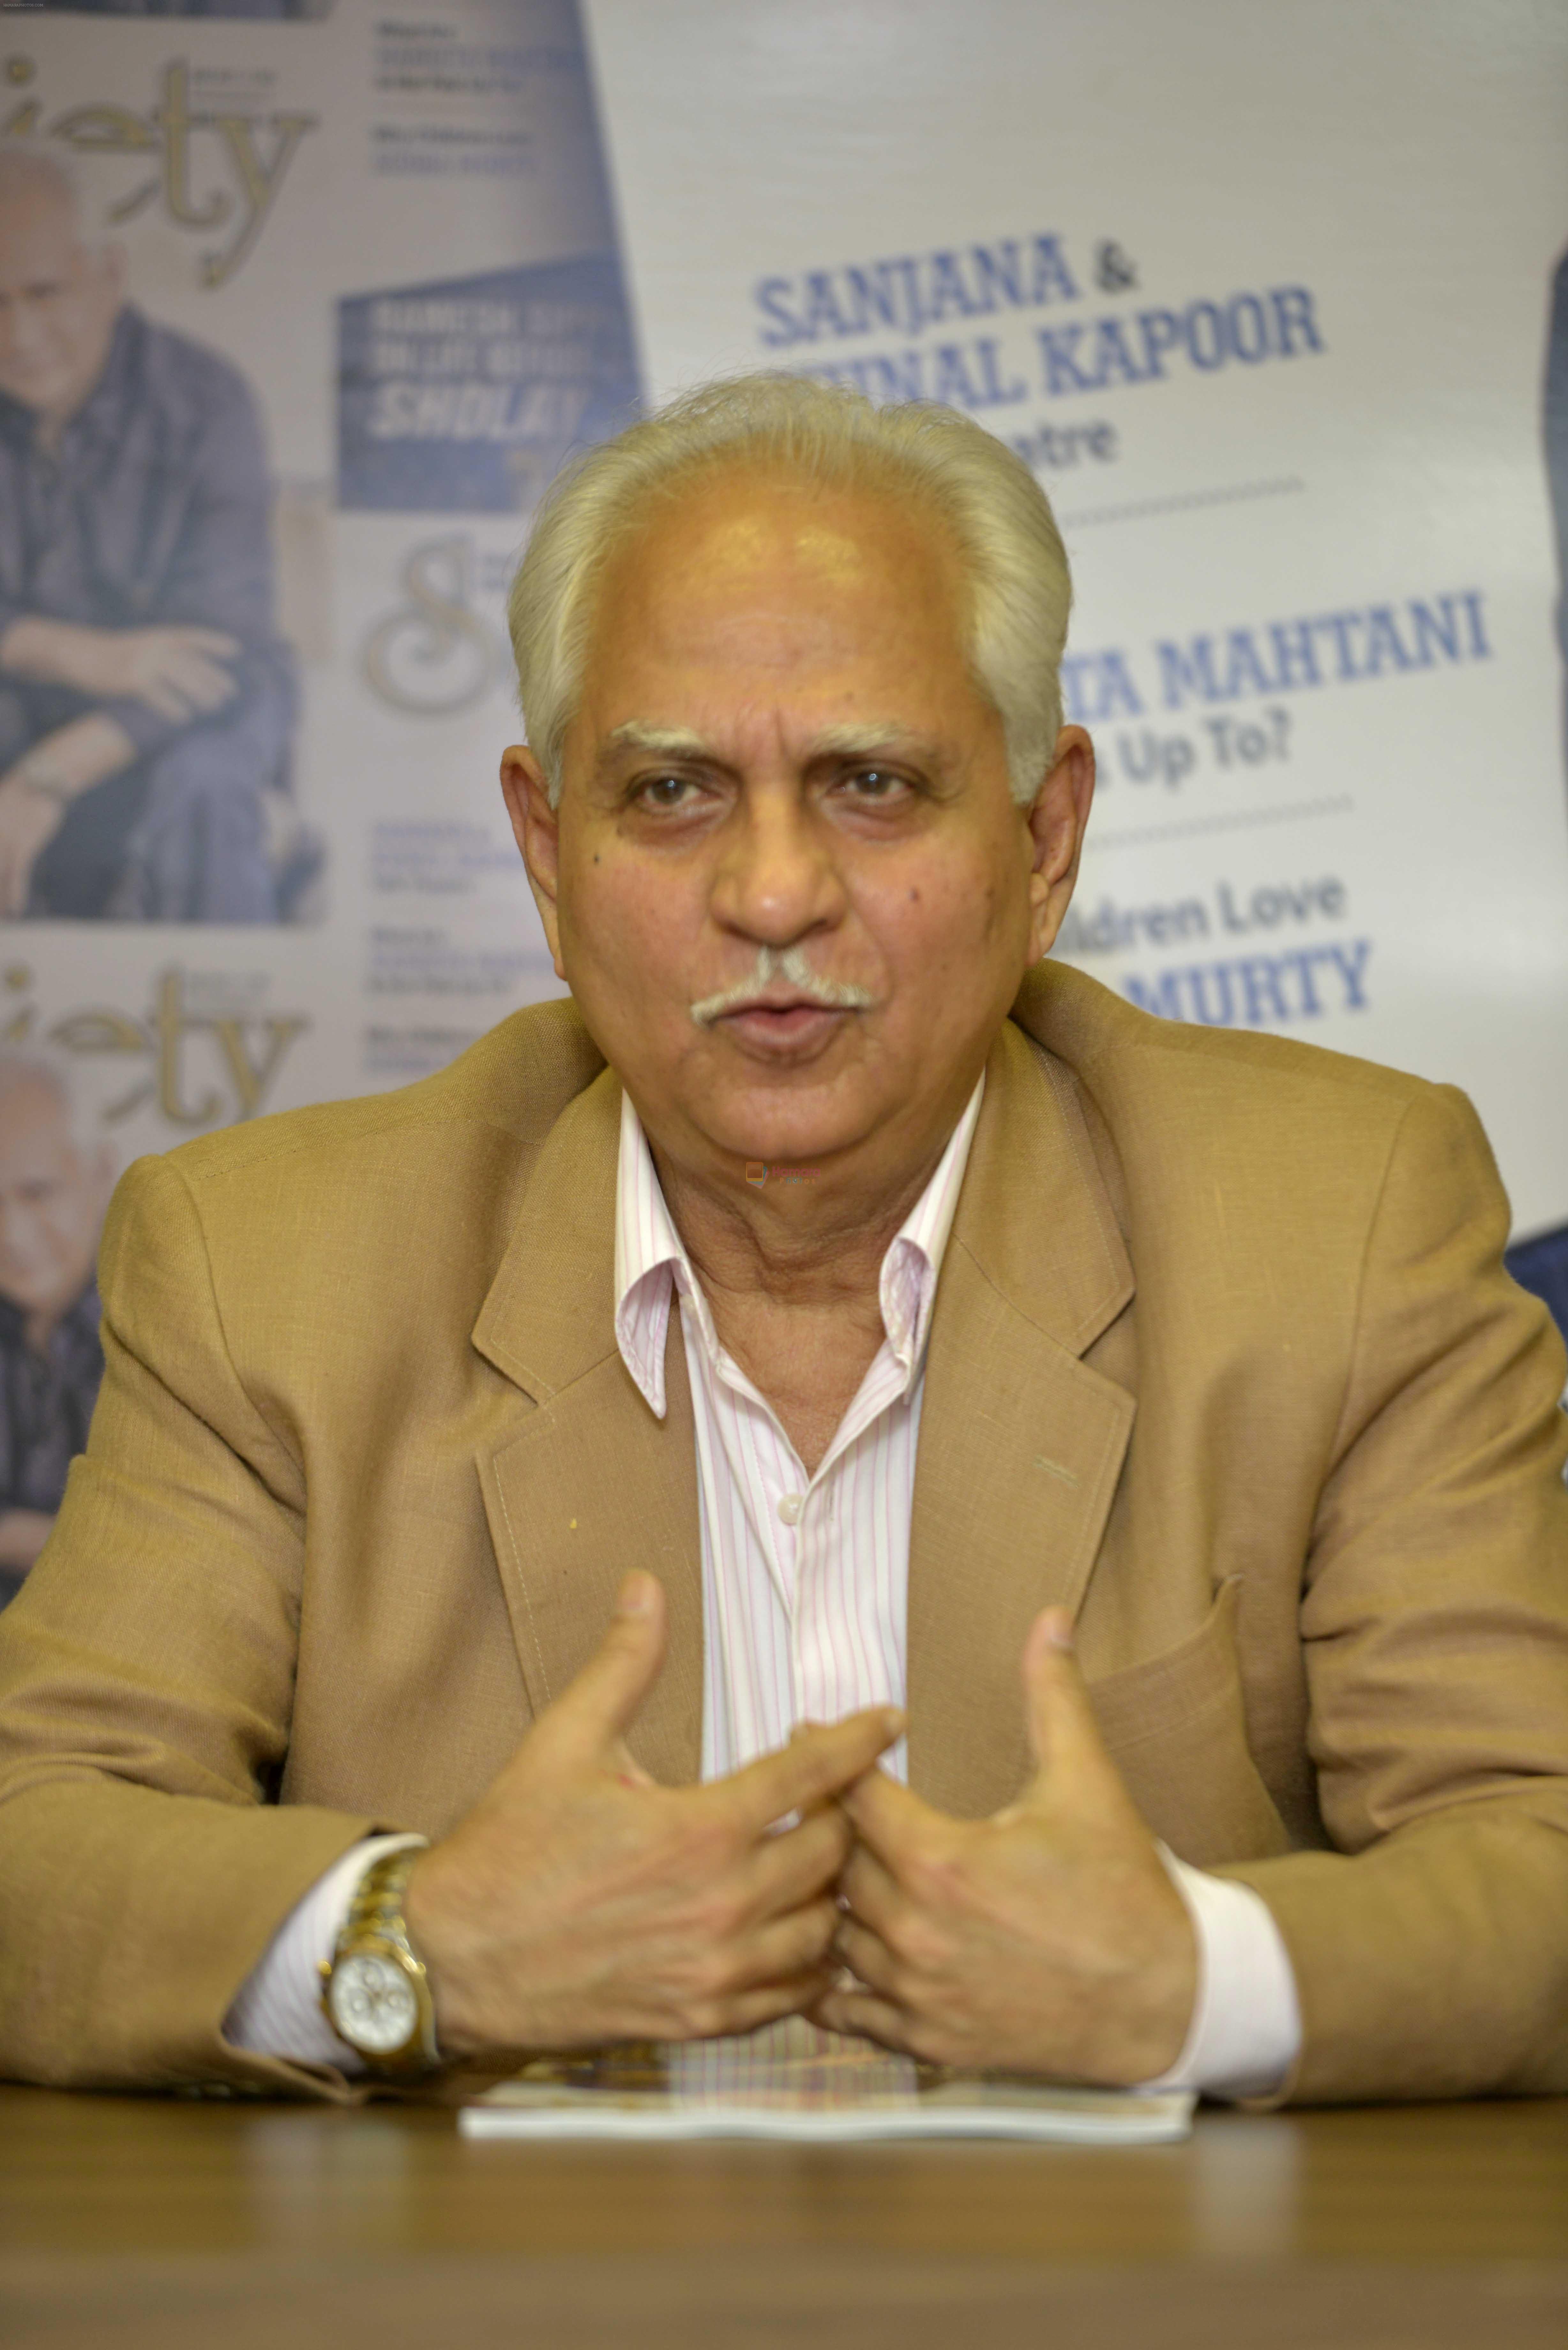 Ramesh Sippy at The Launch Of The May Issue Of Society Magazine By Ramesh Sippy on 15th May 2017